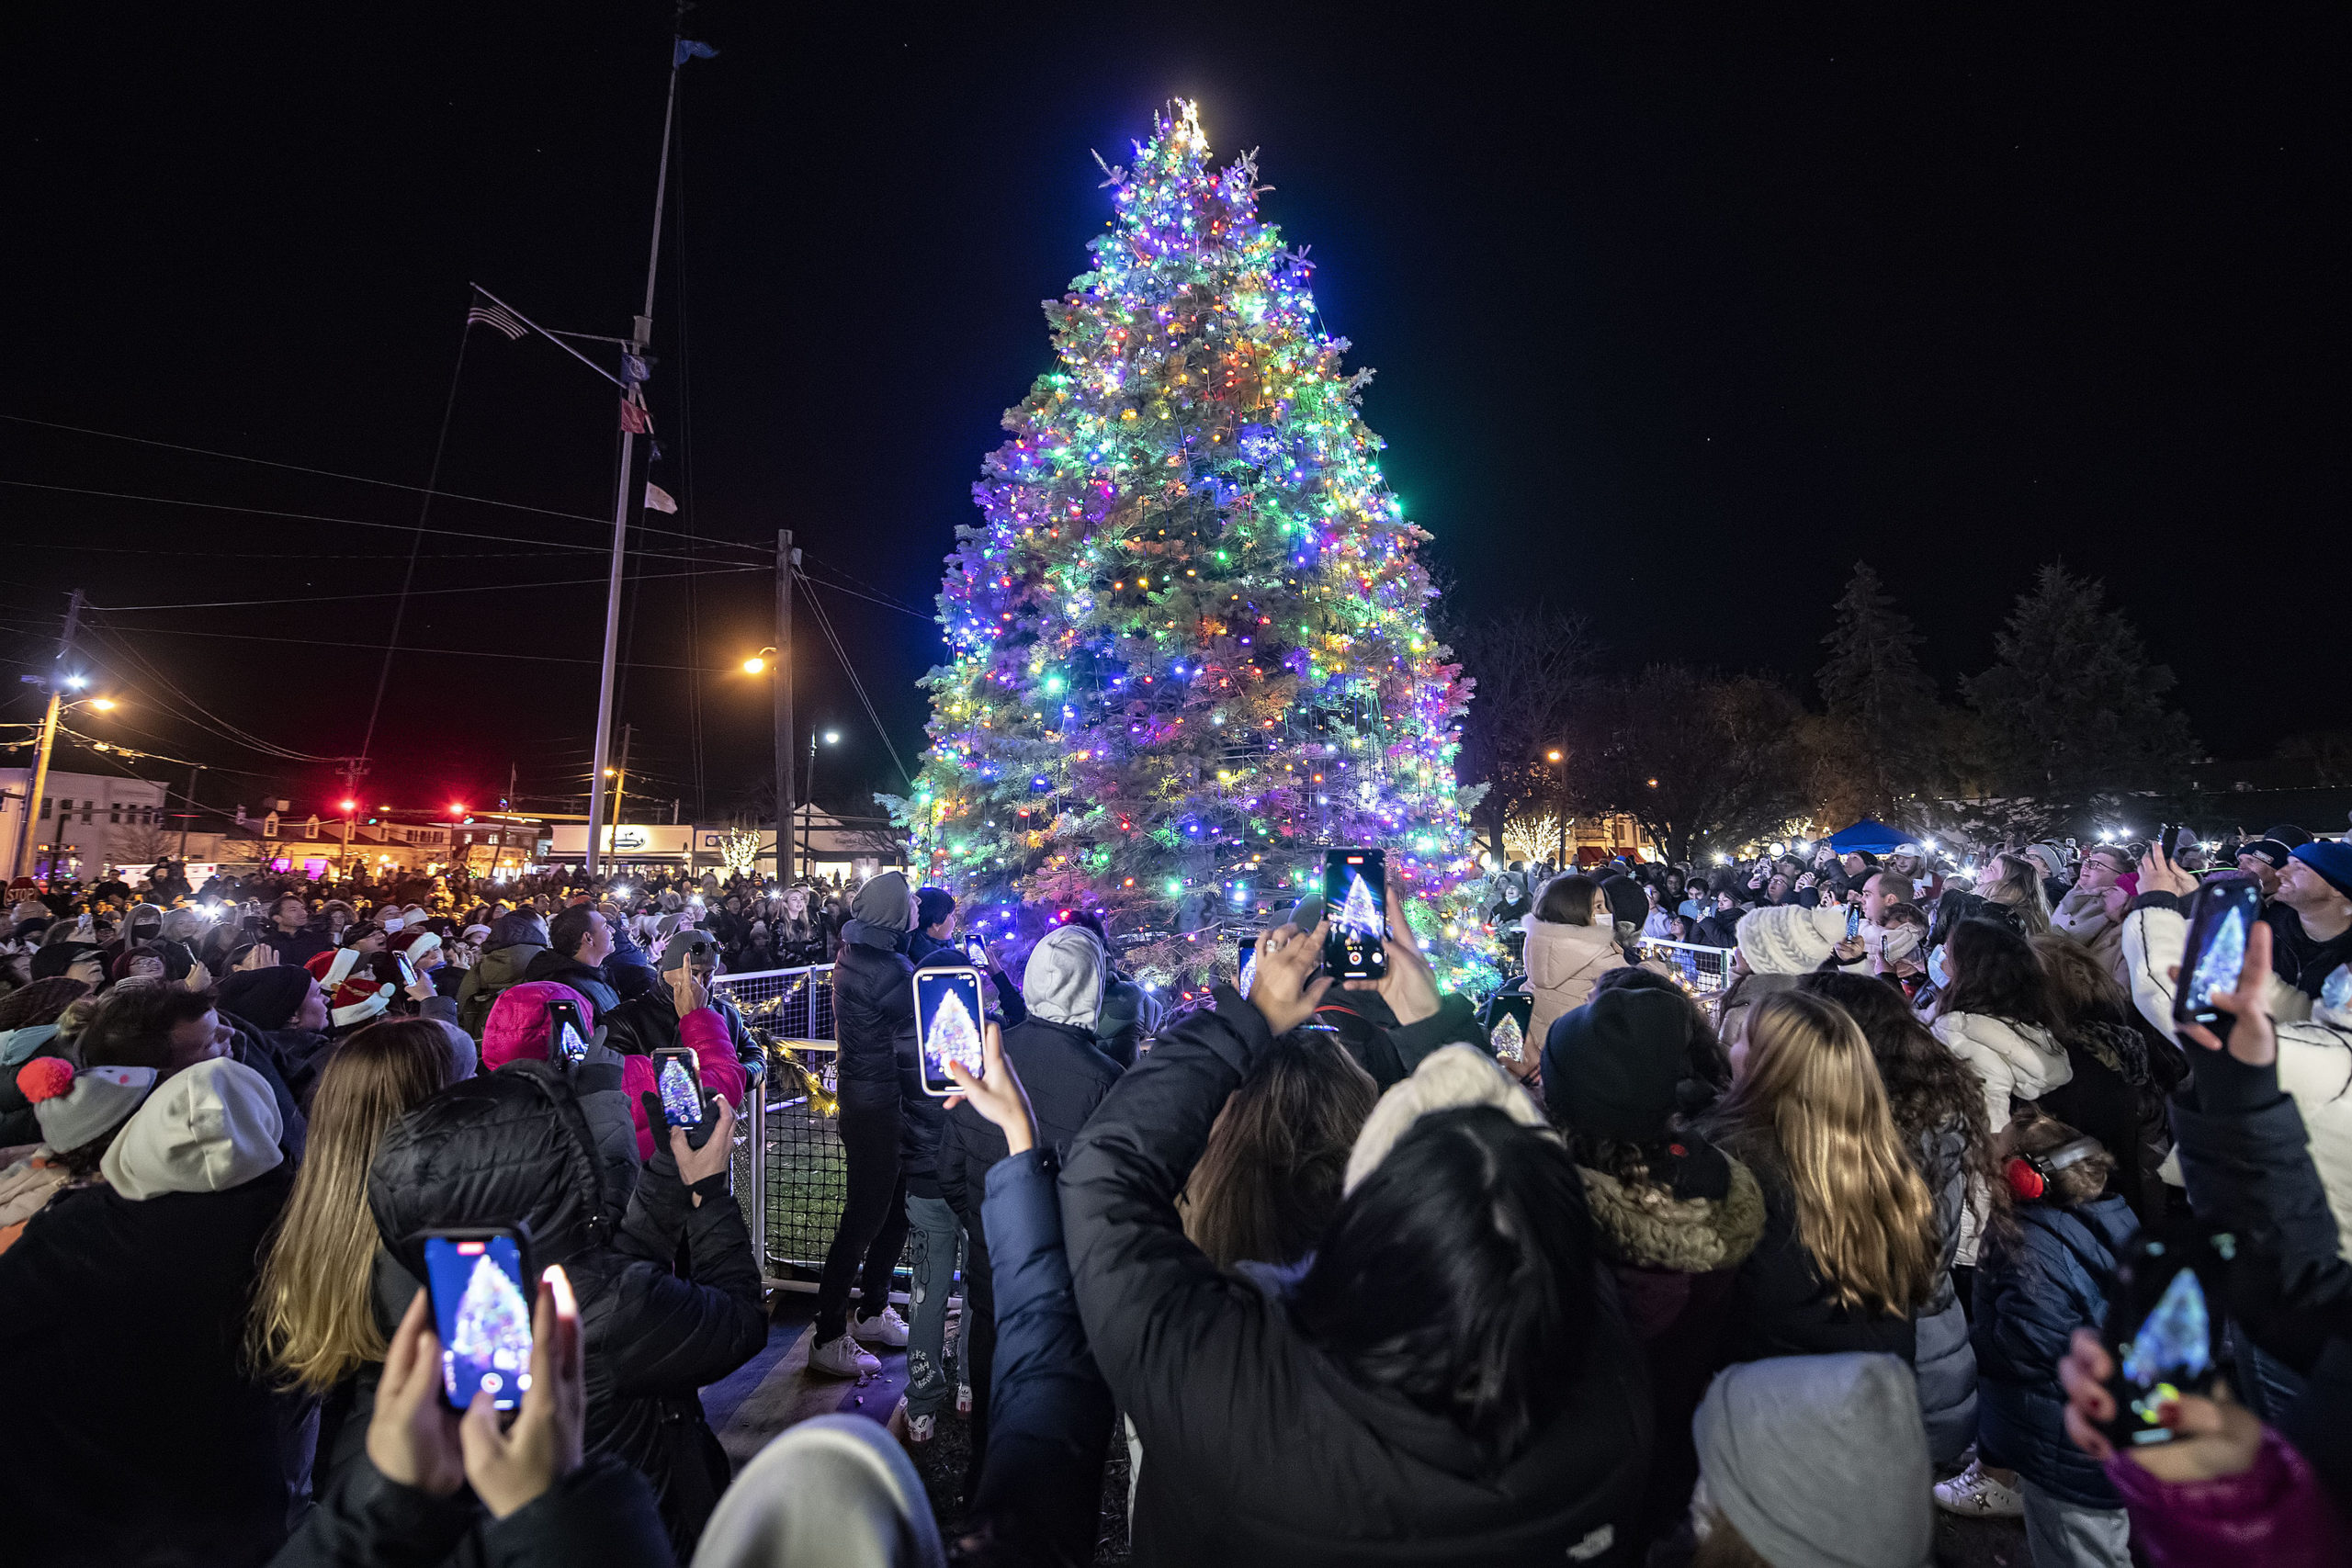 The crowd reacts as the lights come on during the Christmas Tree Lighting Ceremony in Agawam Park on Saturday night.  MICHAEL HELLER